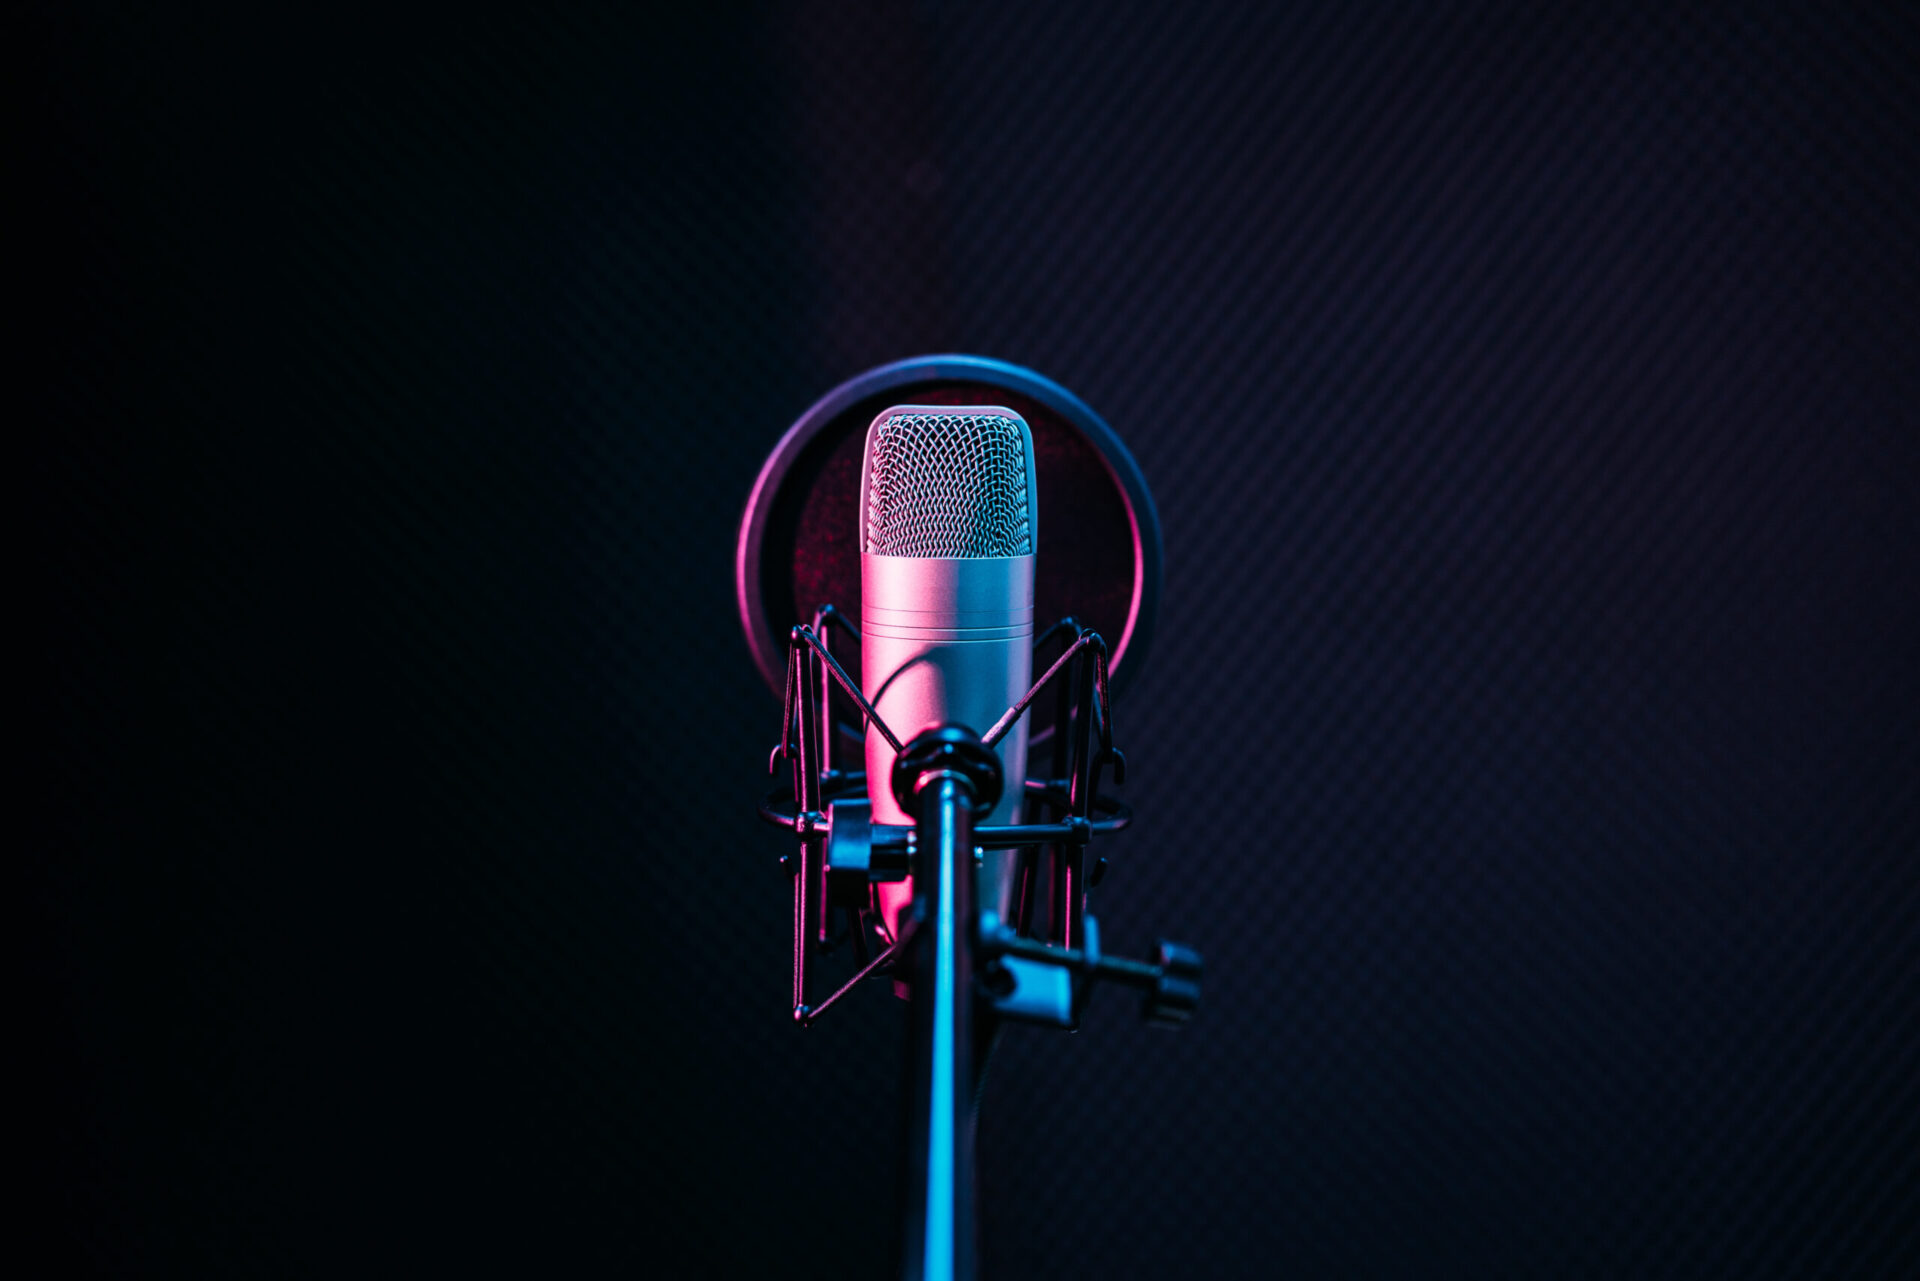 A microphone with prices and packages displayed in front of a dark background.